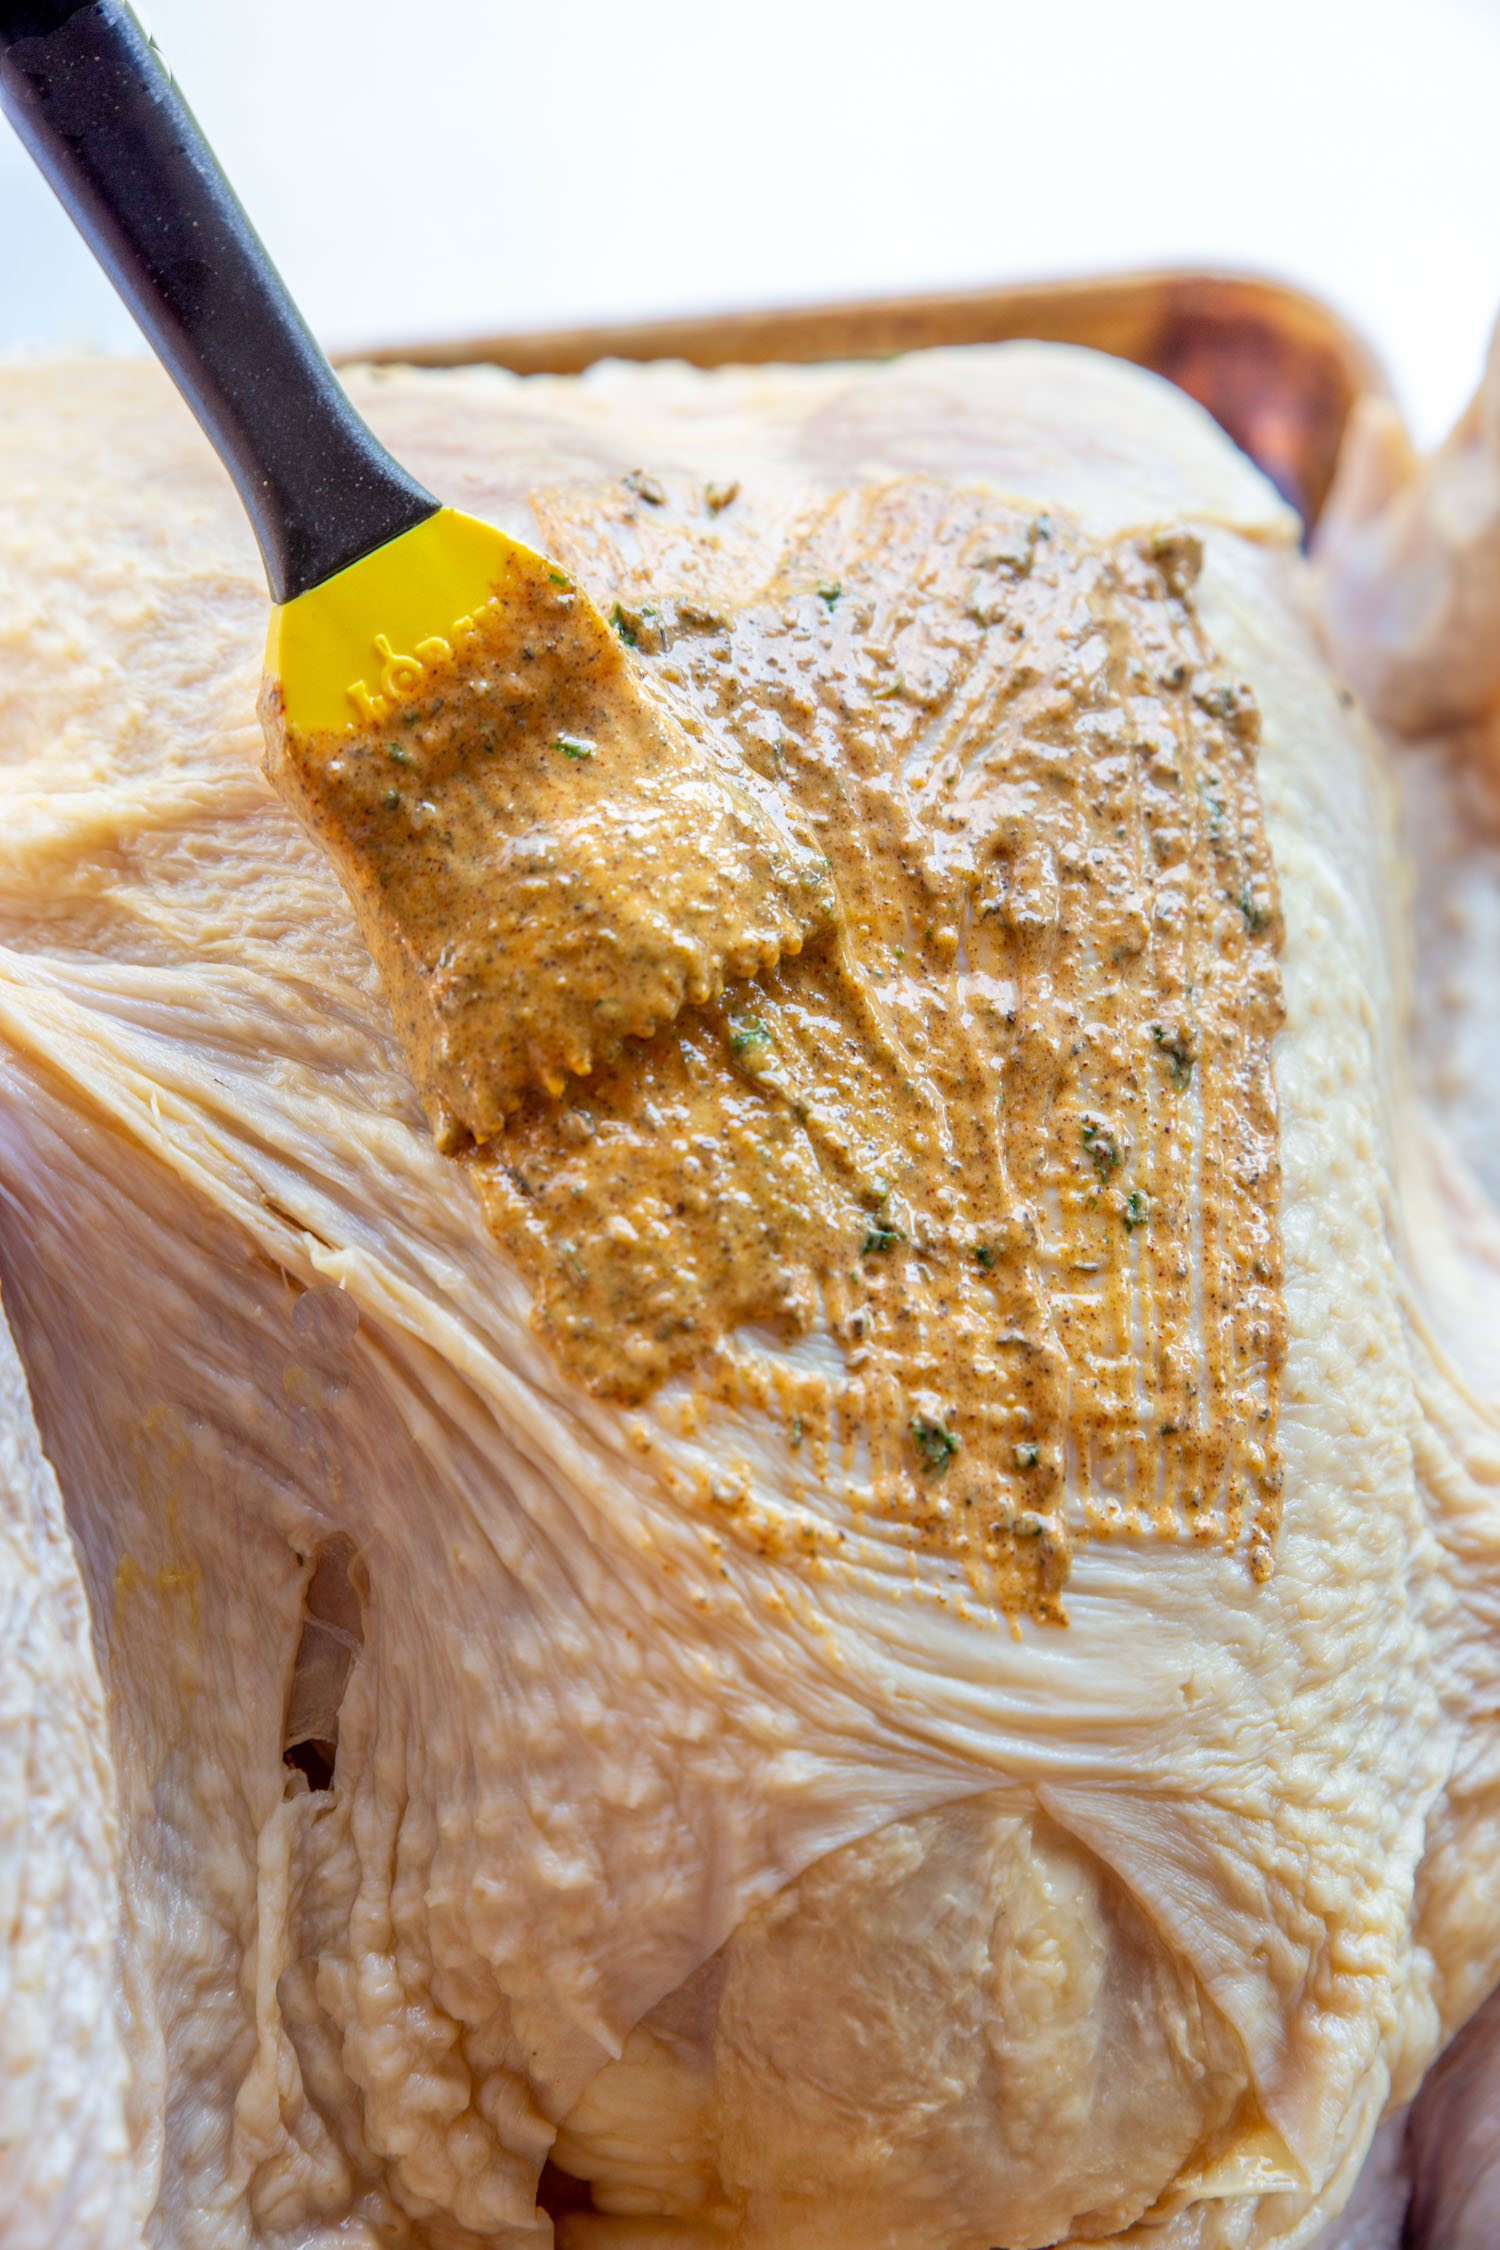 Painting the compound butter onto the turkey